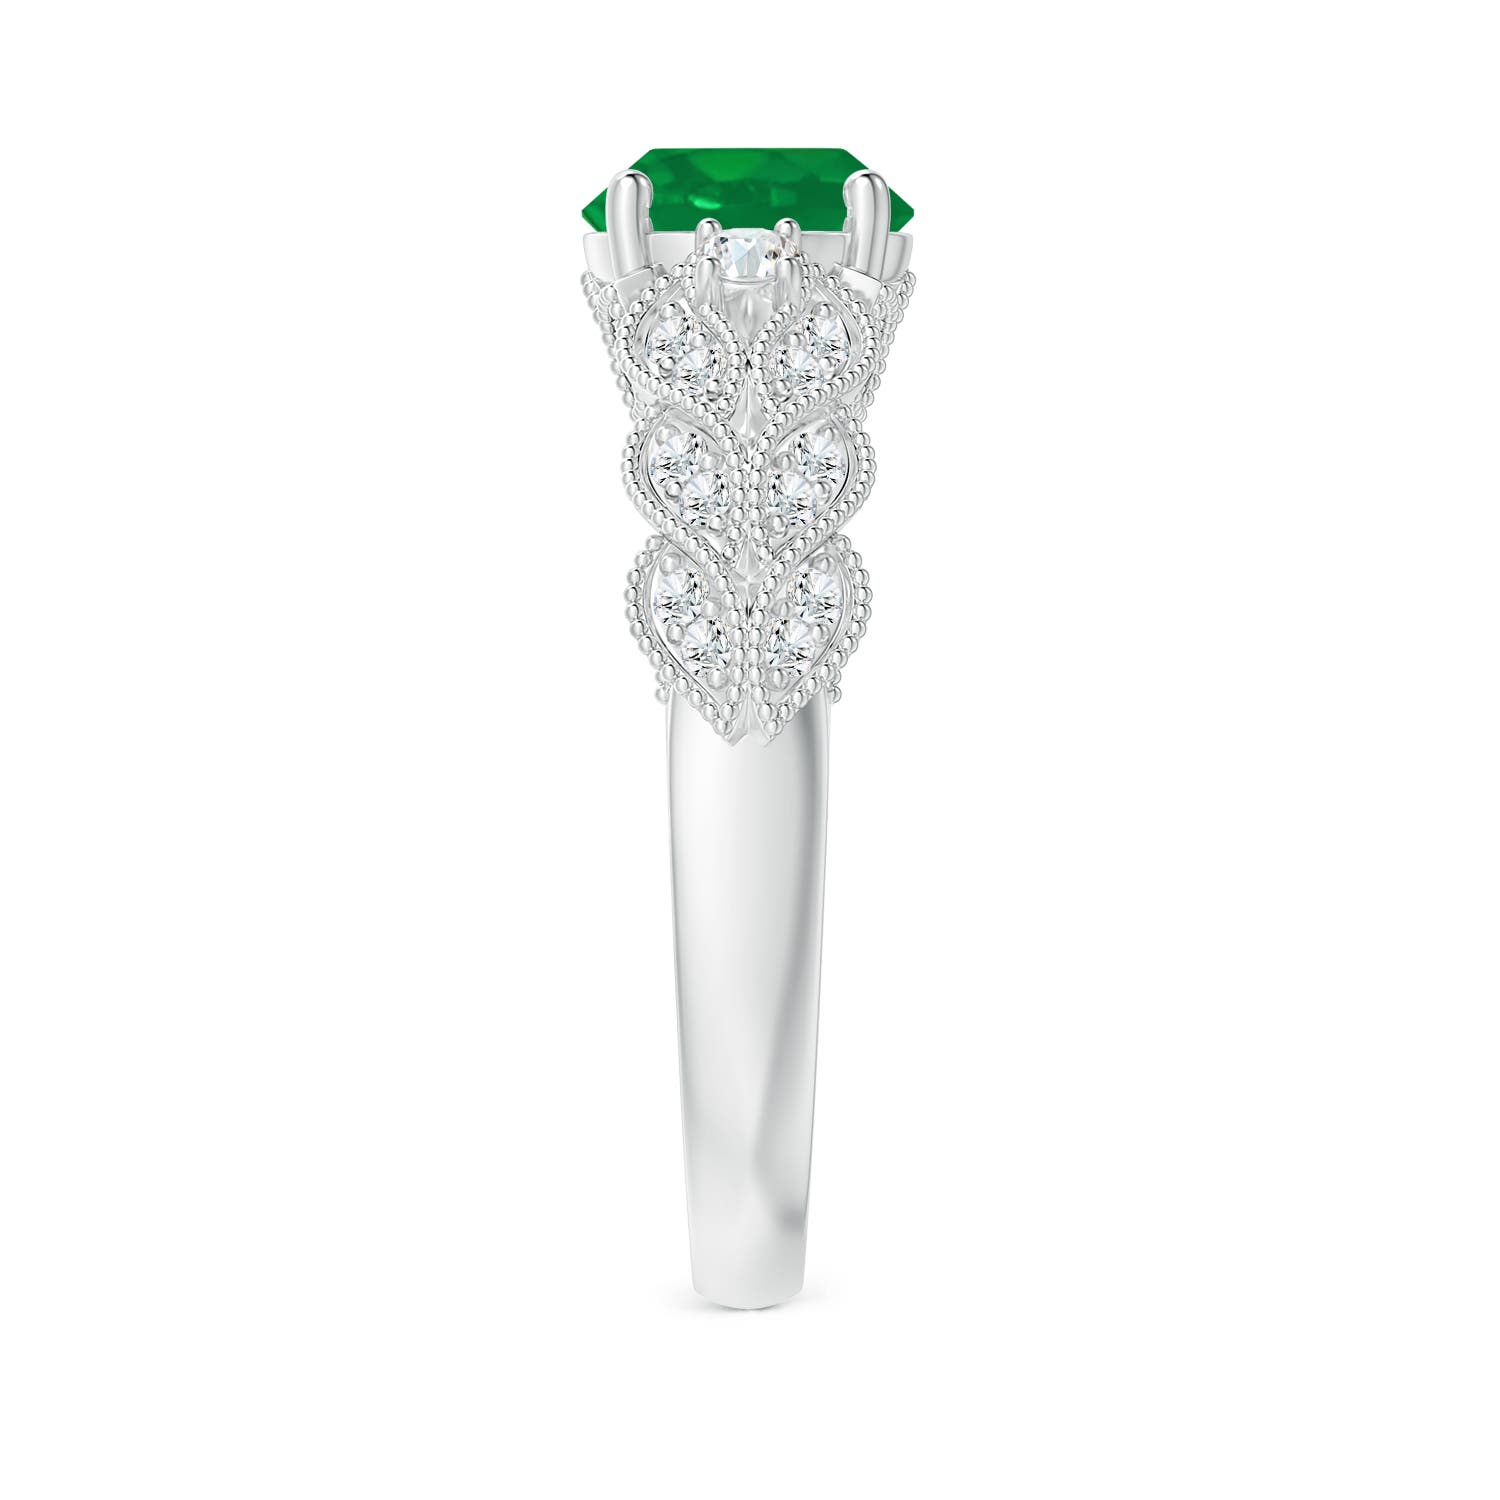 AA - Emerald / 1.47 CT / 14 KT White Gold